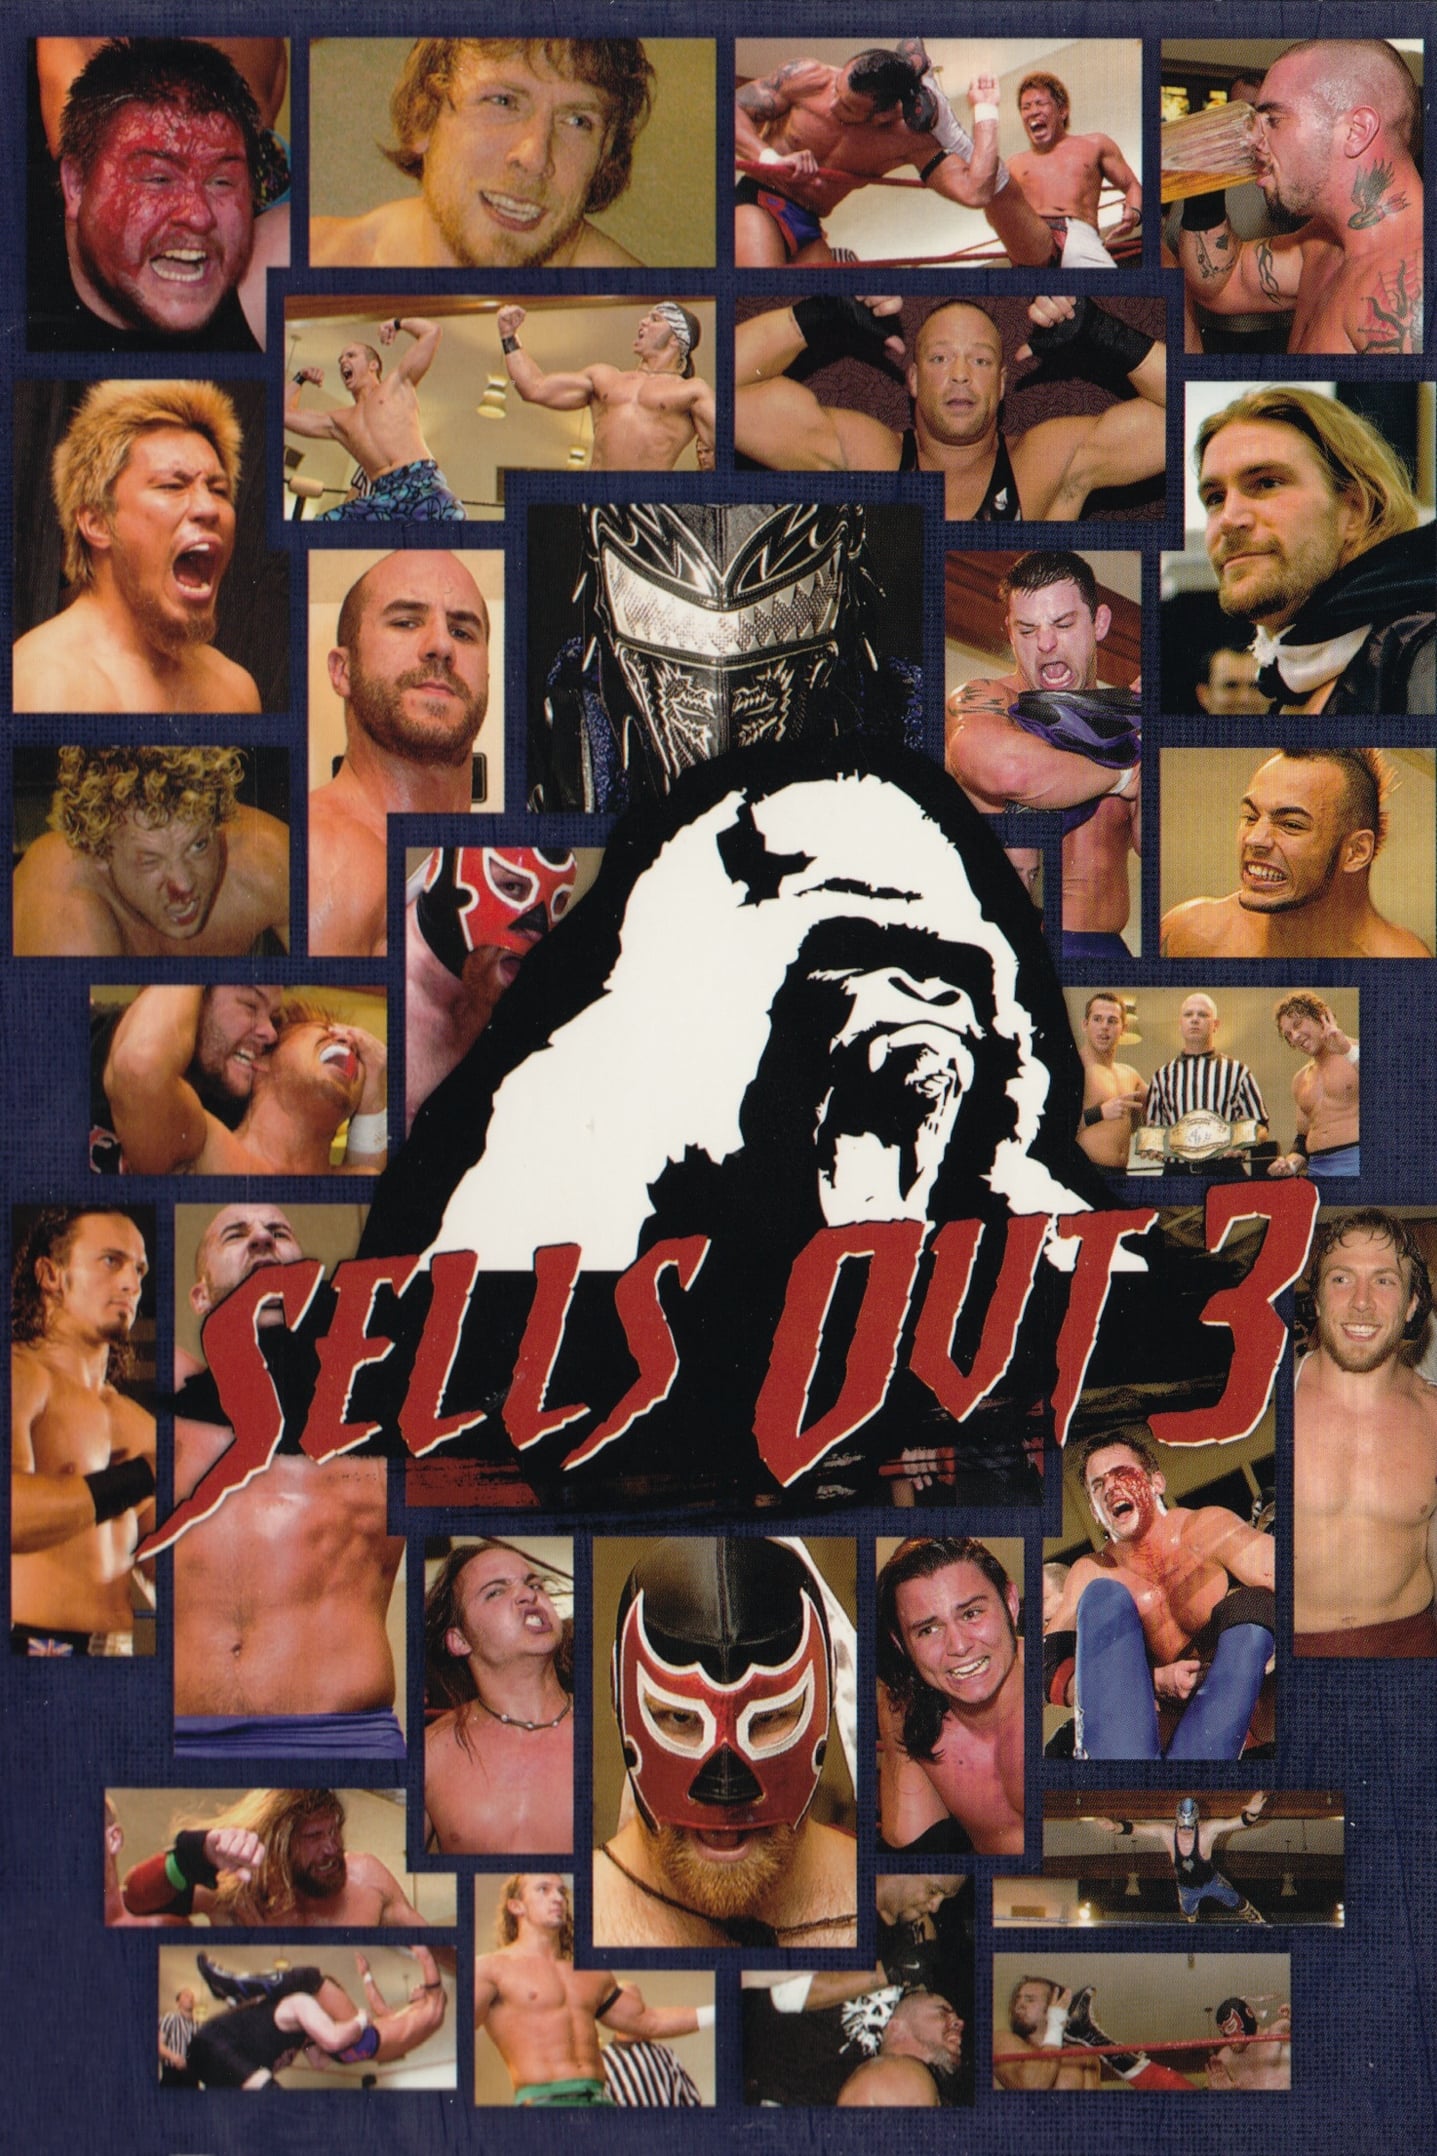 PWG Sells Out: Volume 3